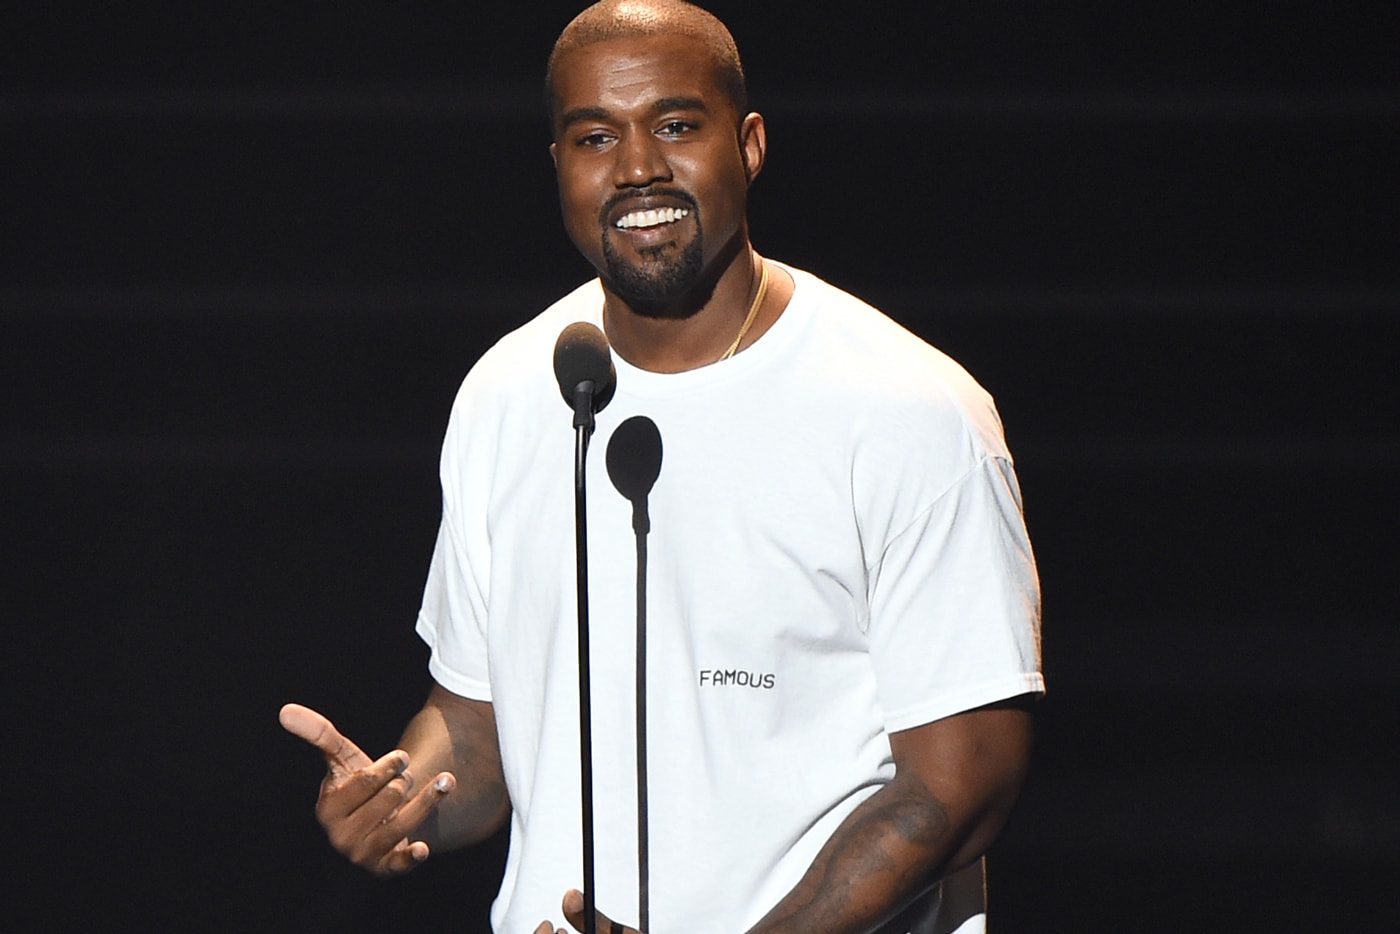 Kanye West: "I Will Have Over 100 GRAMMYs Before I Die"